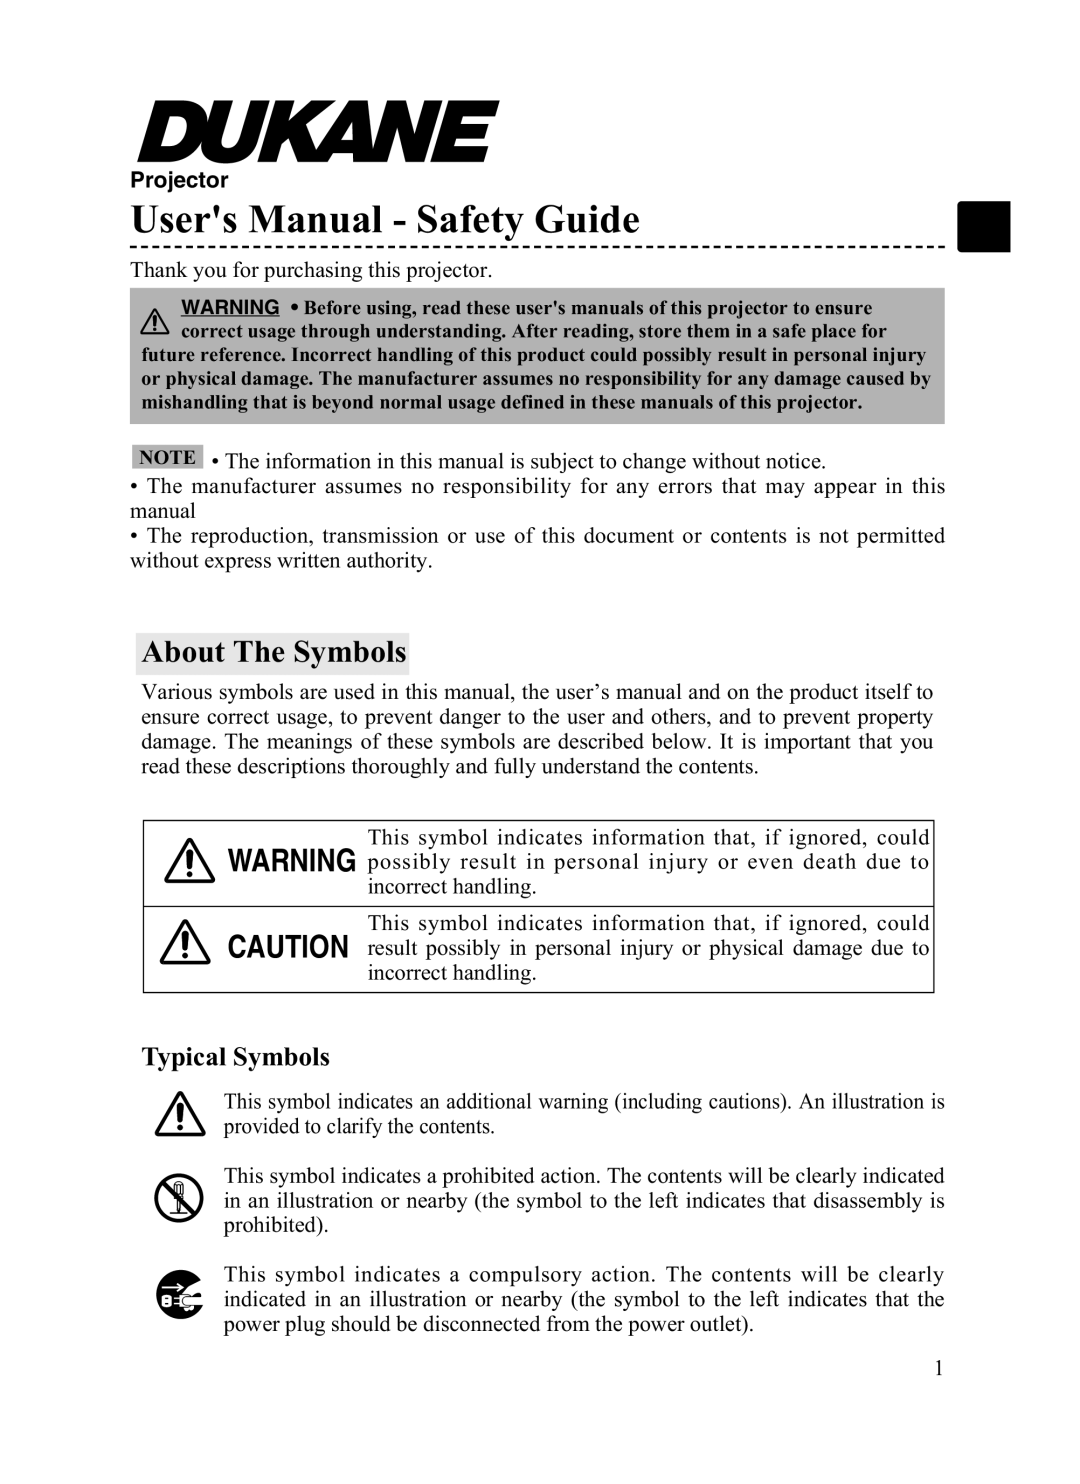 Dukane 8055 user manual Users Manual - Safety Guide, Typical Symbols, About The Symbols, Projector 